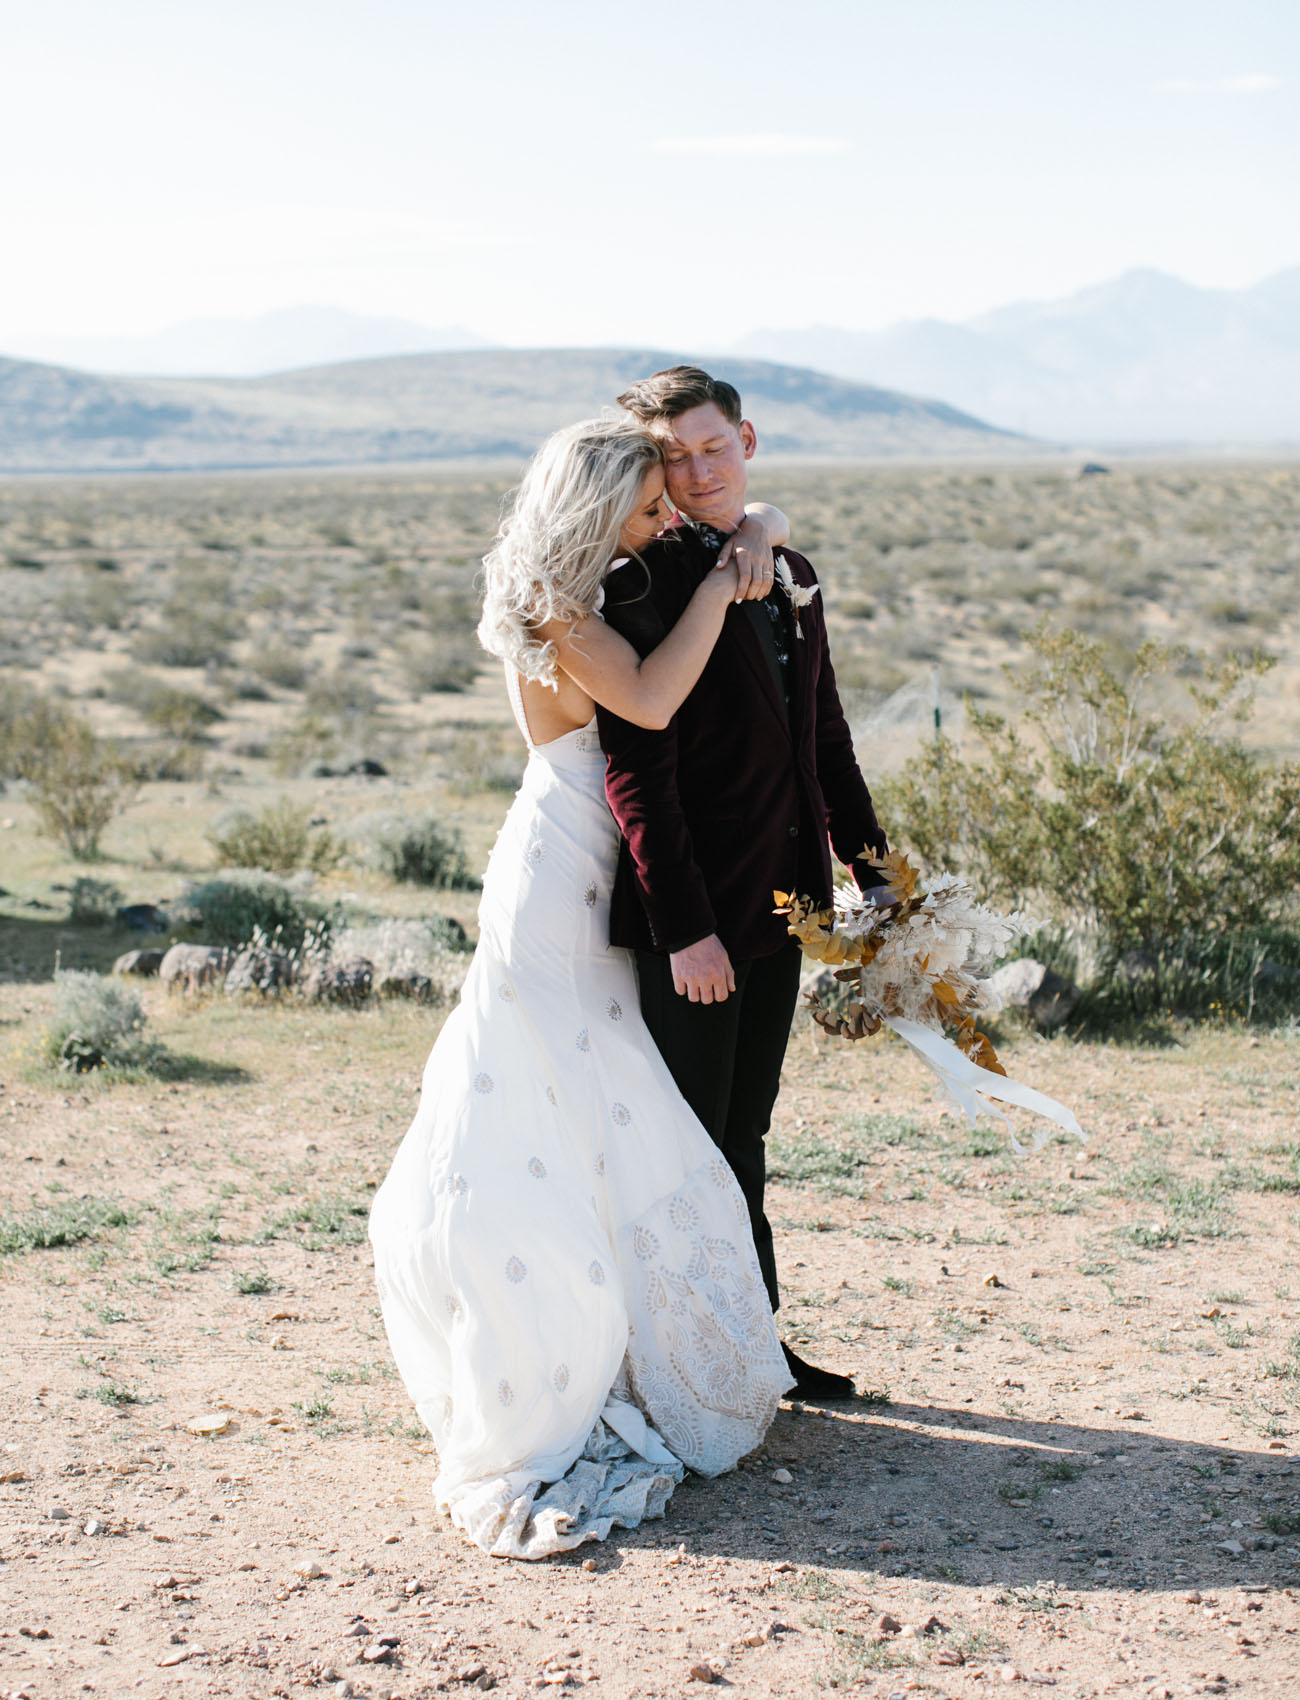 This beautiful couple went for a lovely festival desert wedding hiring an Airbnb